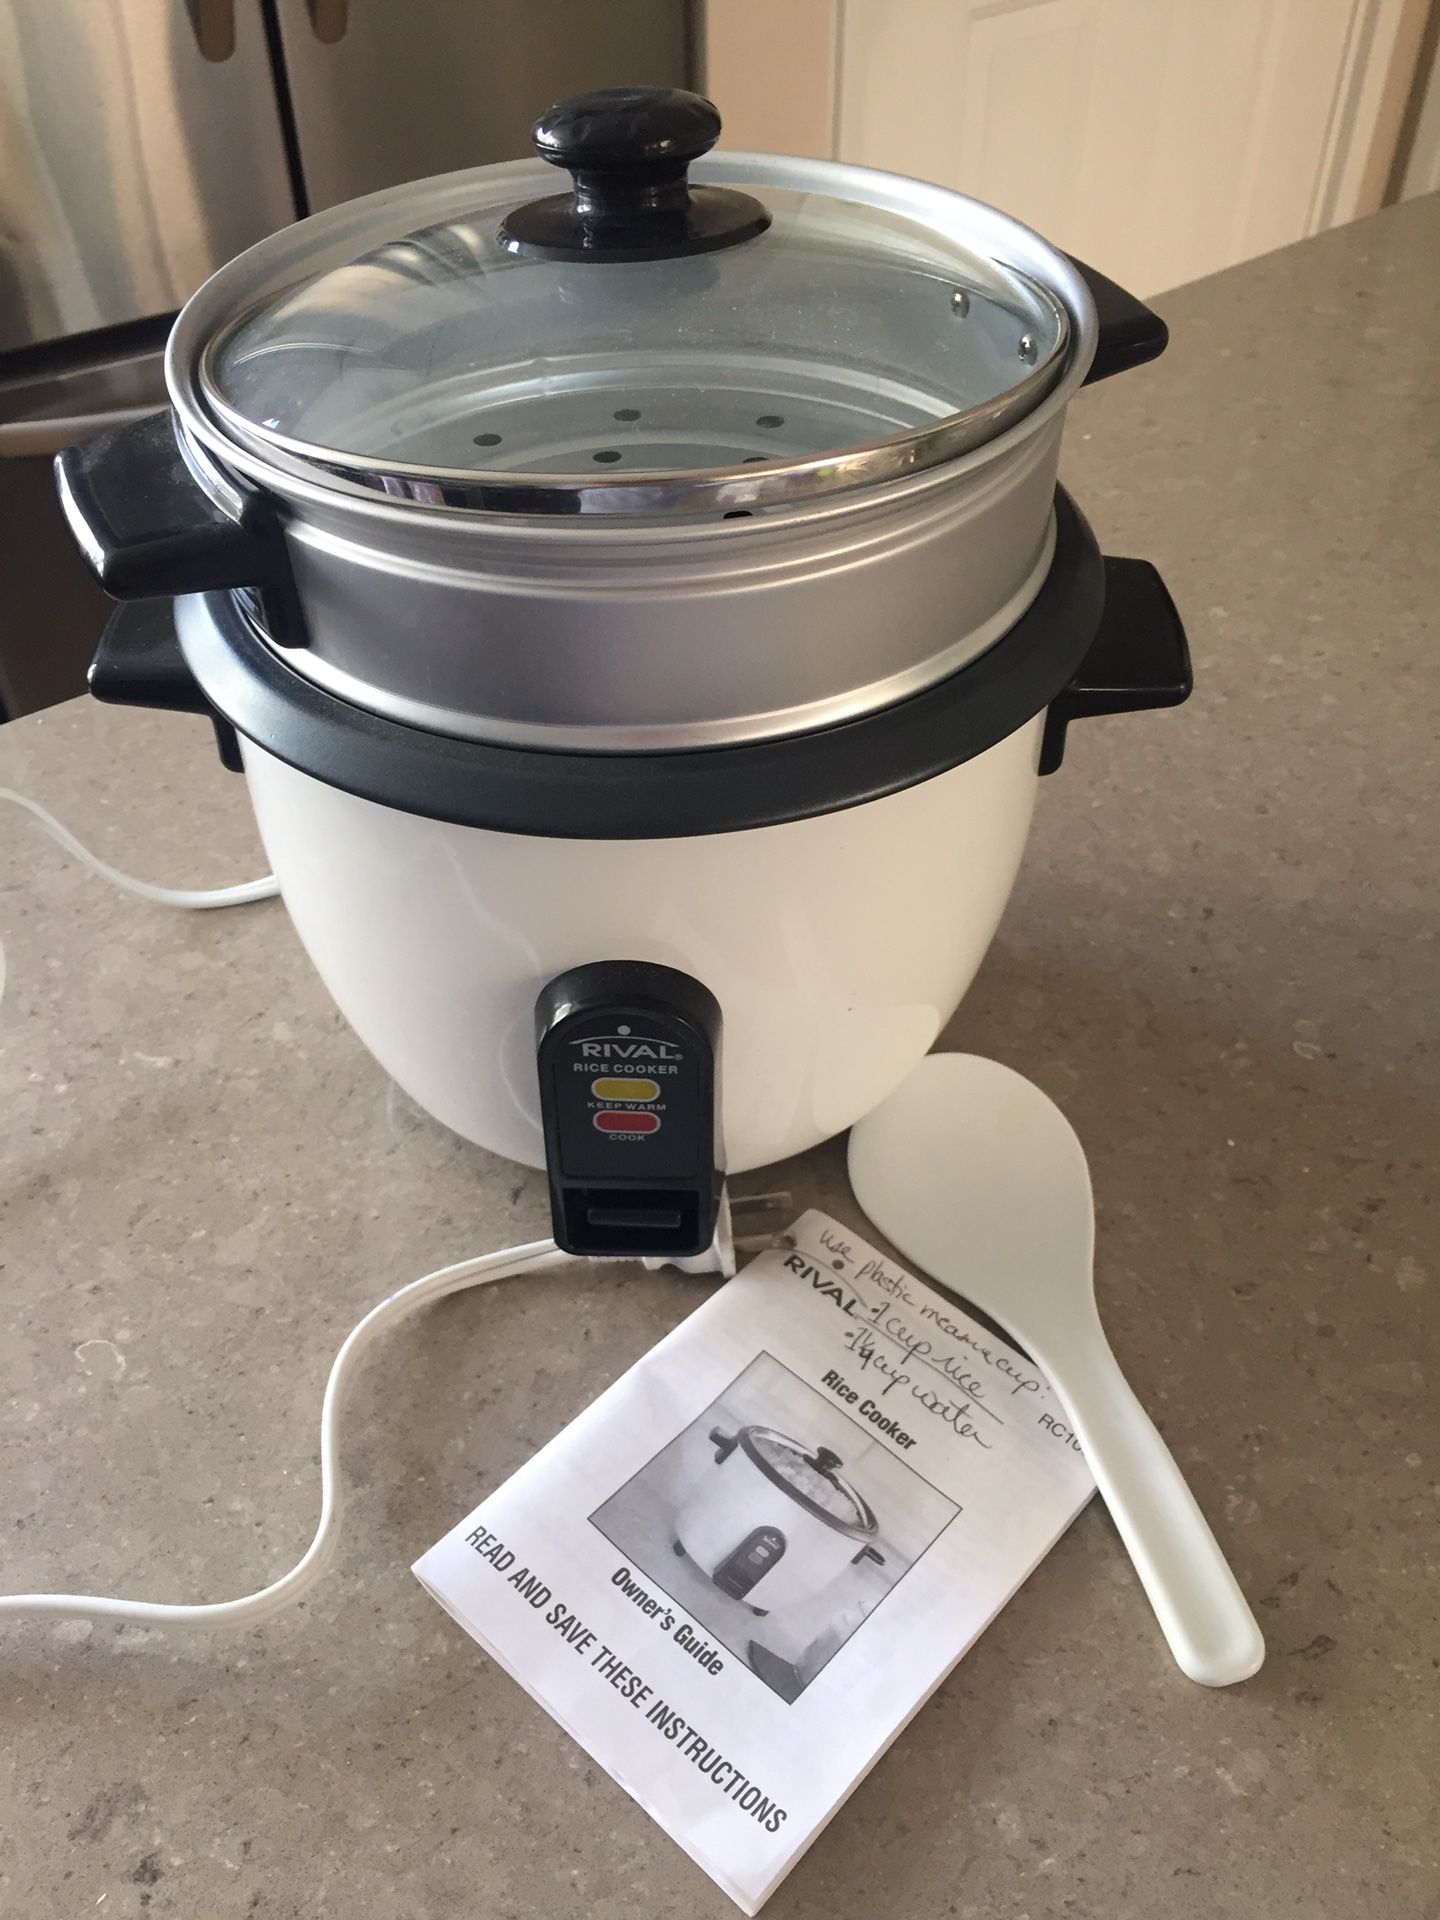 Rice Cooker 8 Cup - PARS KHAZAR Automatic for Sale in Las Vegas, NV -  OfferUp